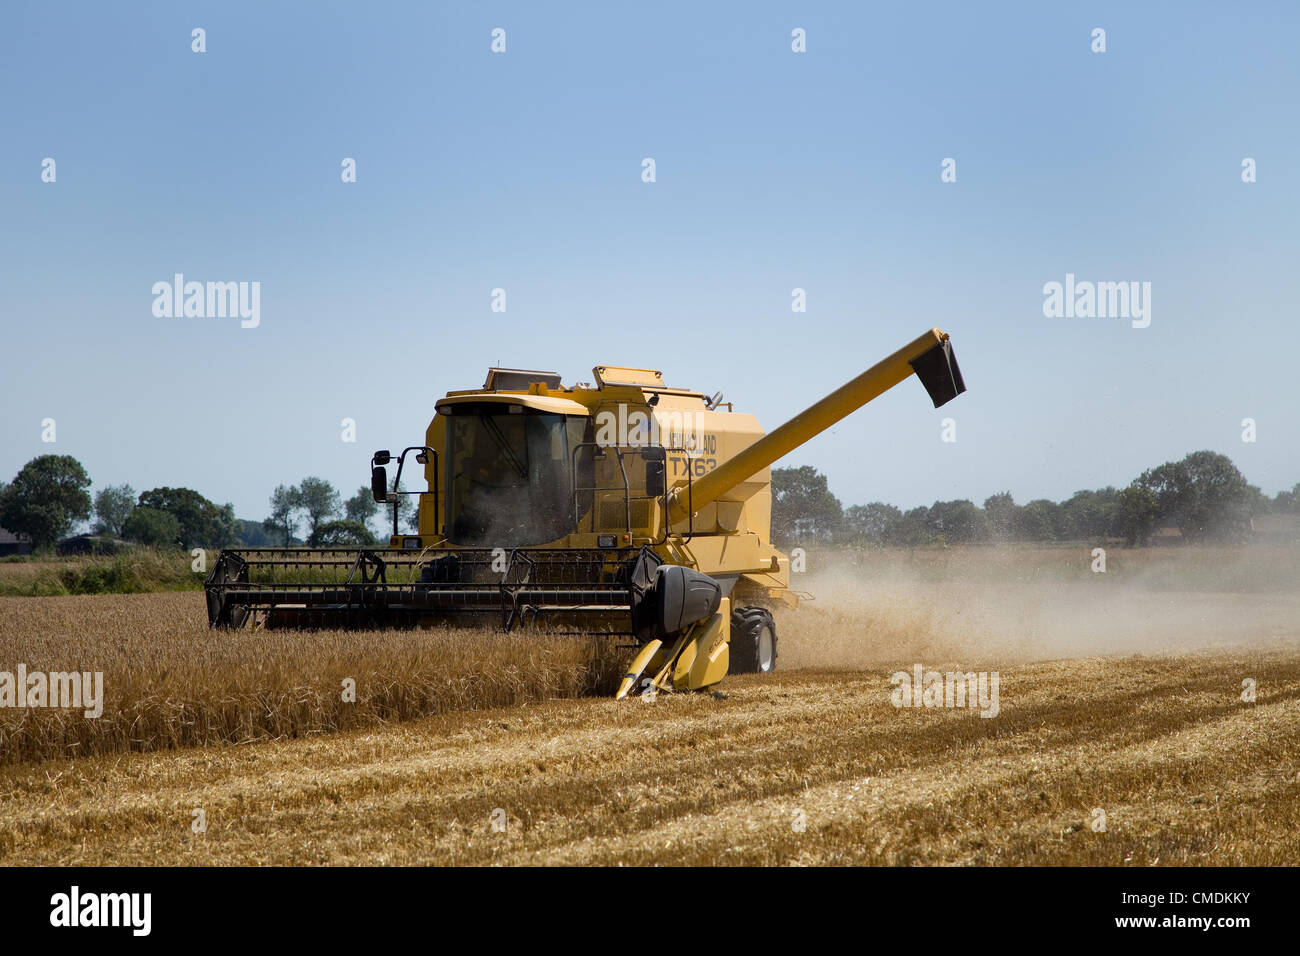 New Holland TX63 combine harvester combing Barley in Norfolk,UK against a  blue summer sky Stock Photo - Alamy